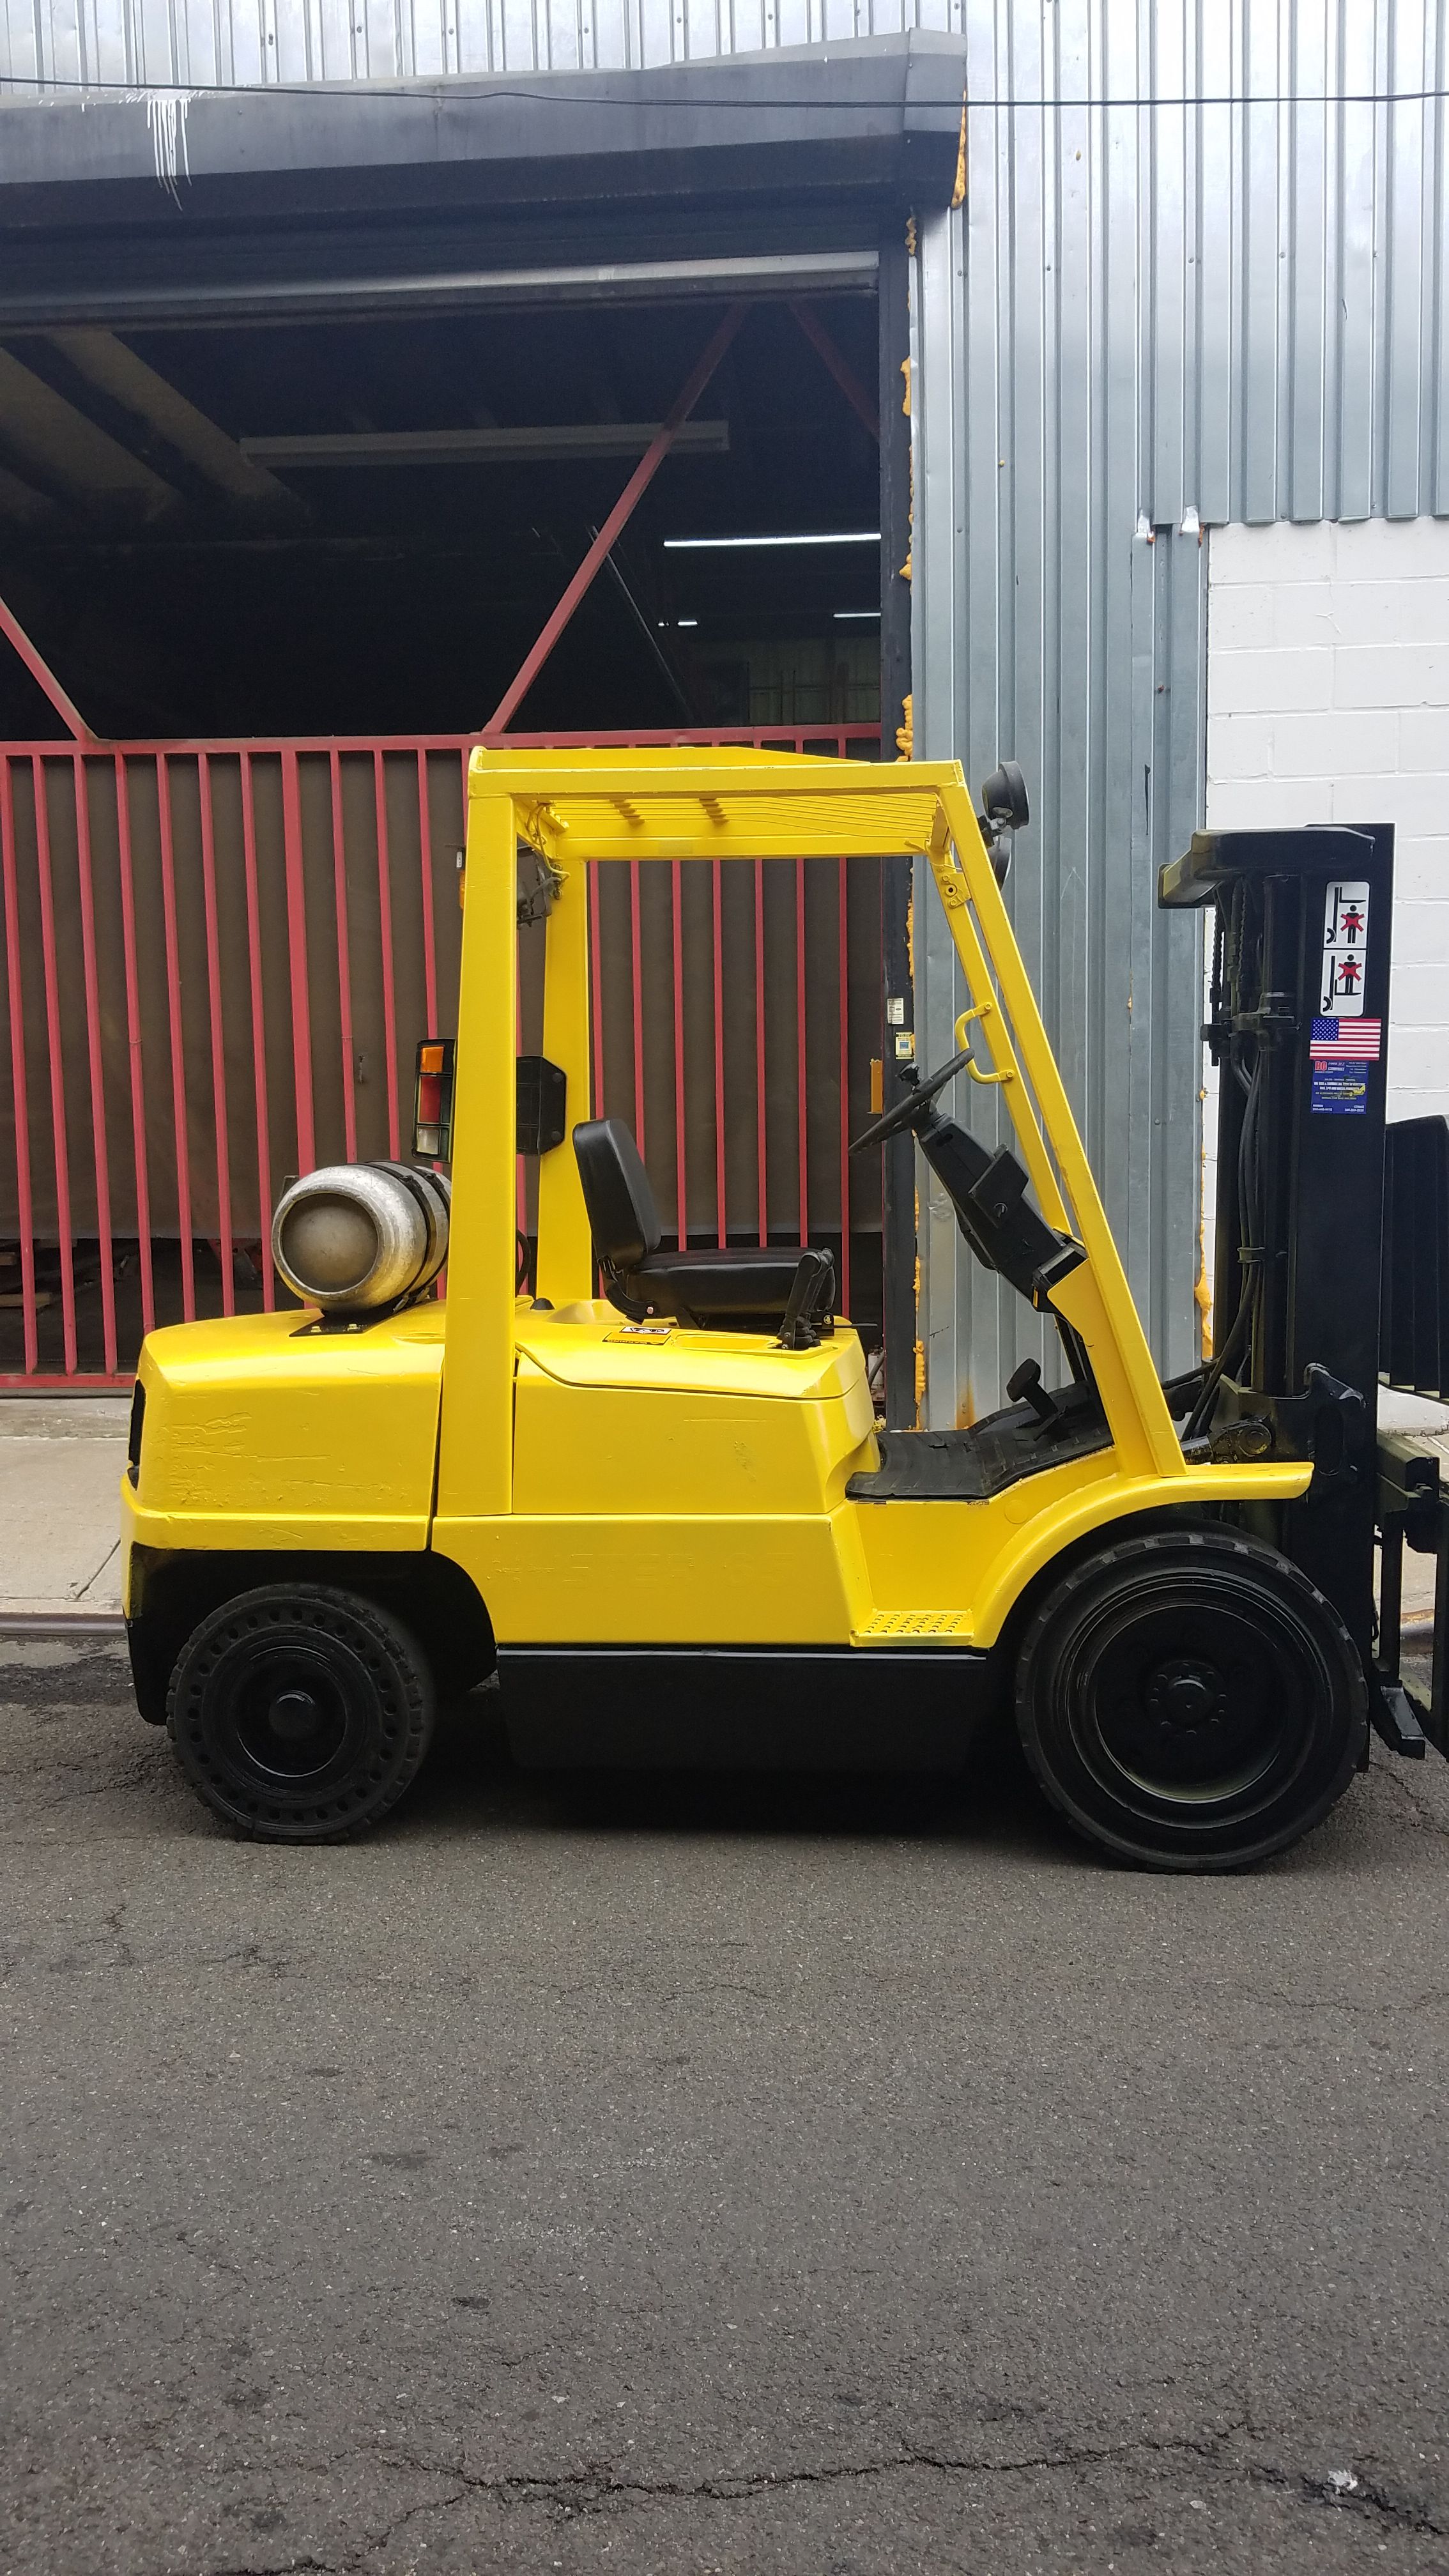 HYSTER FORKLIFT 6500 LBS